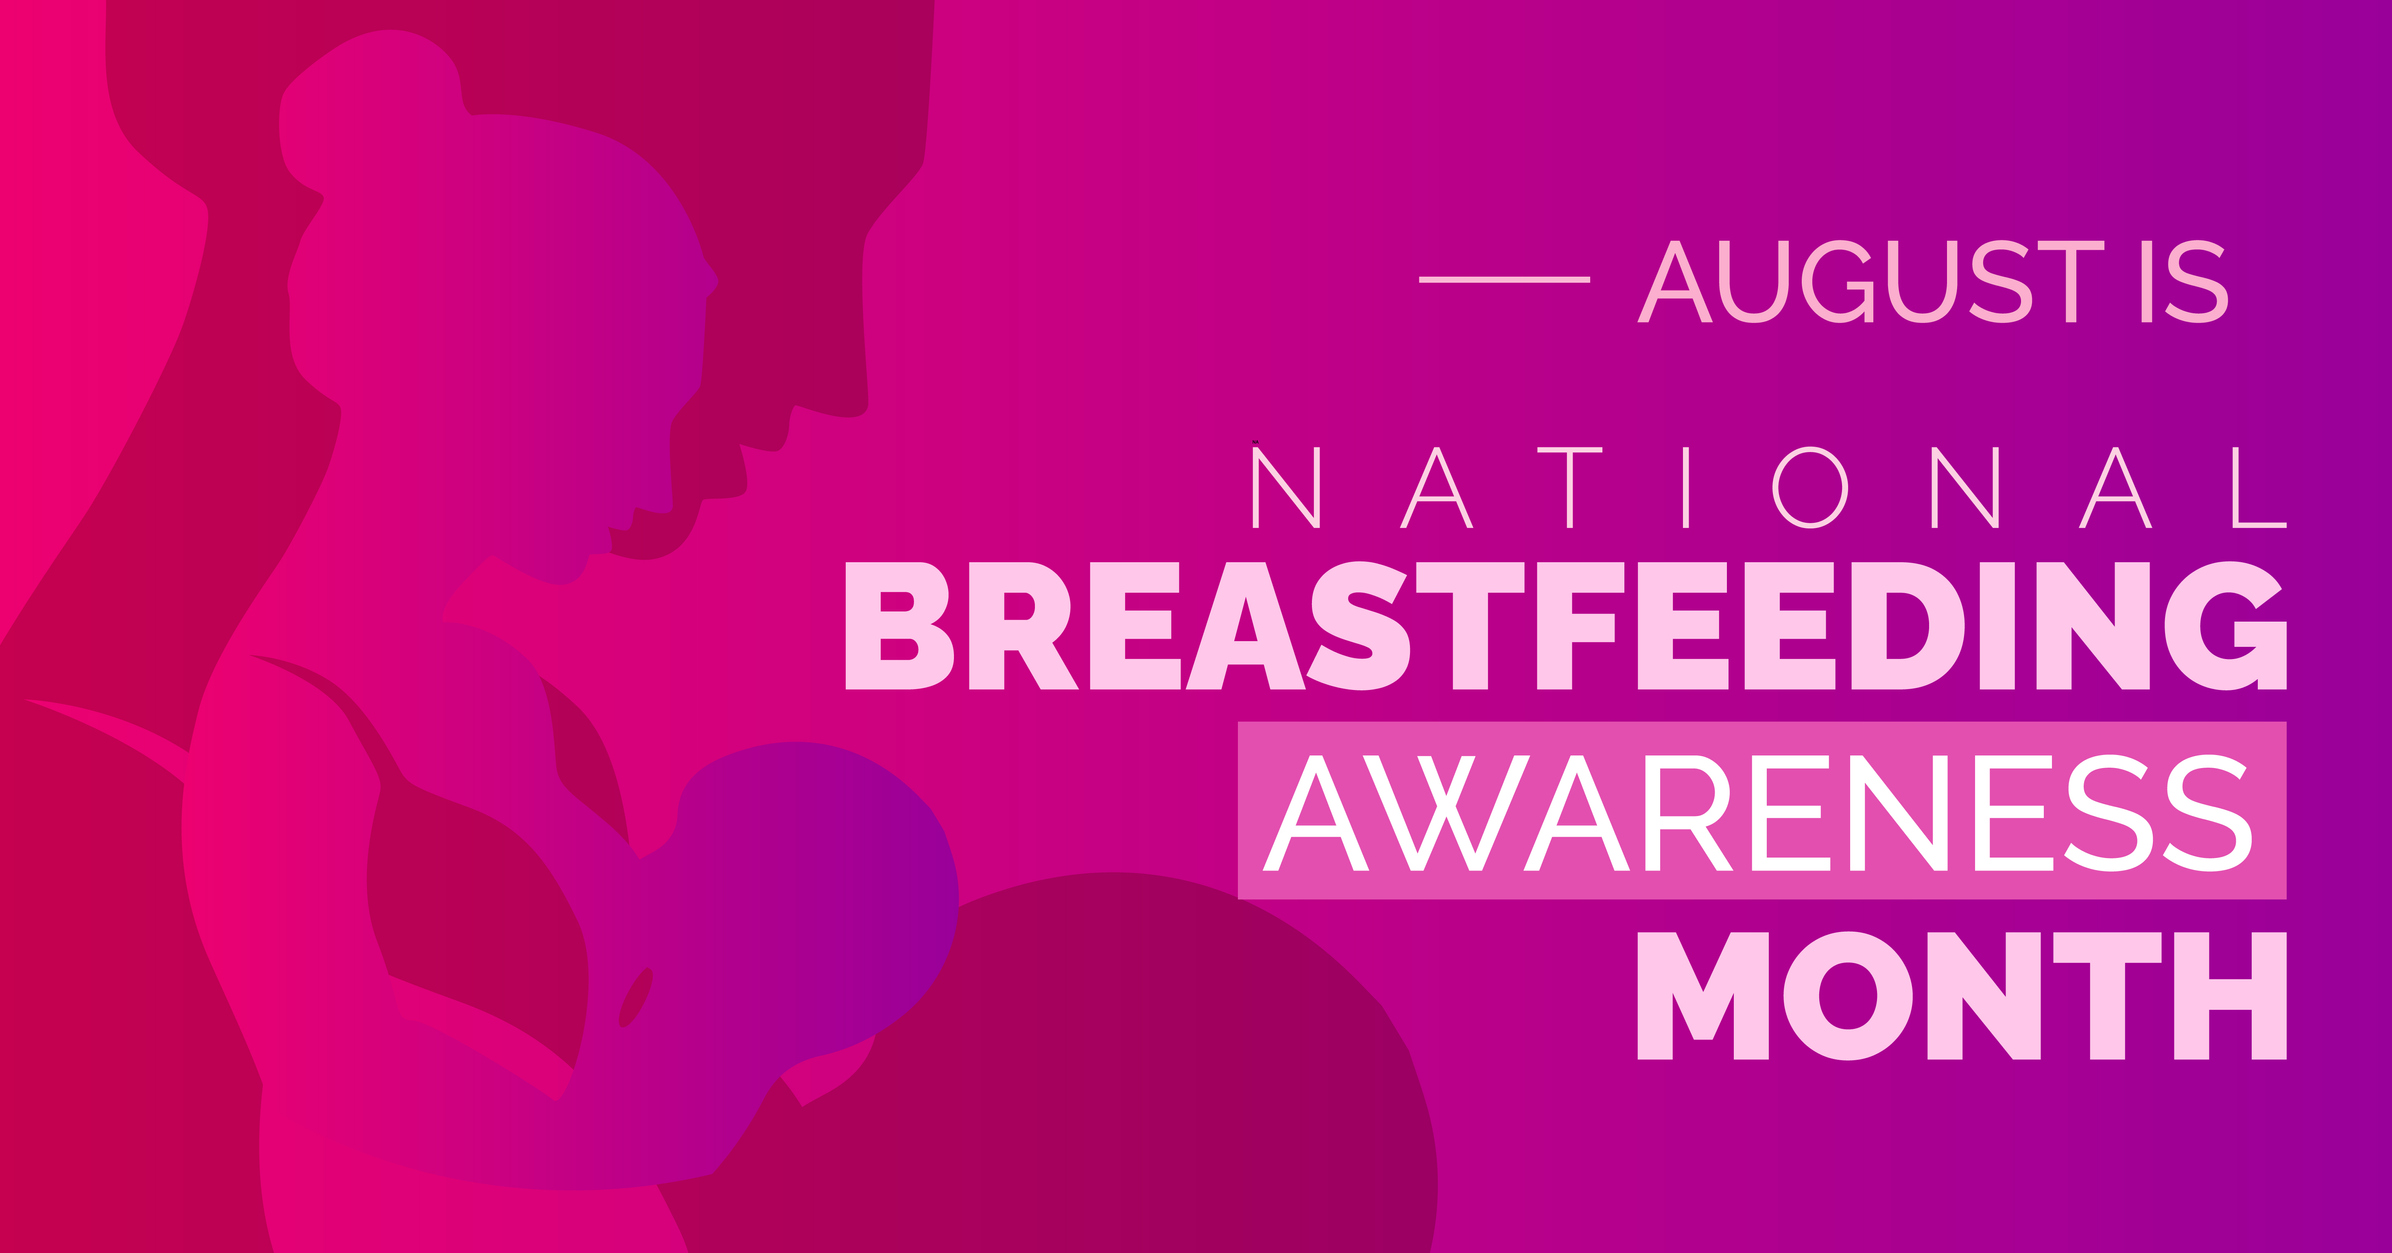 August is Breastfeeding Awareness Month - Heritage Valley Health System